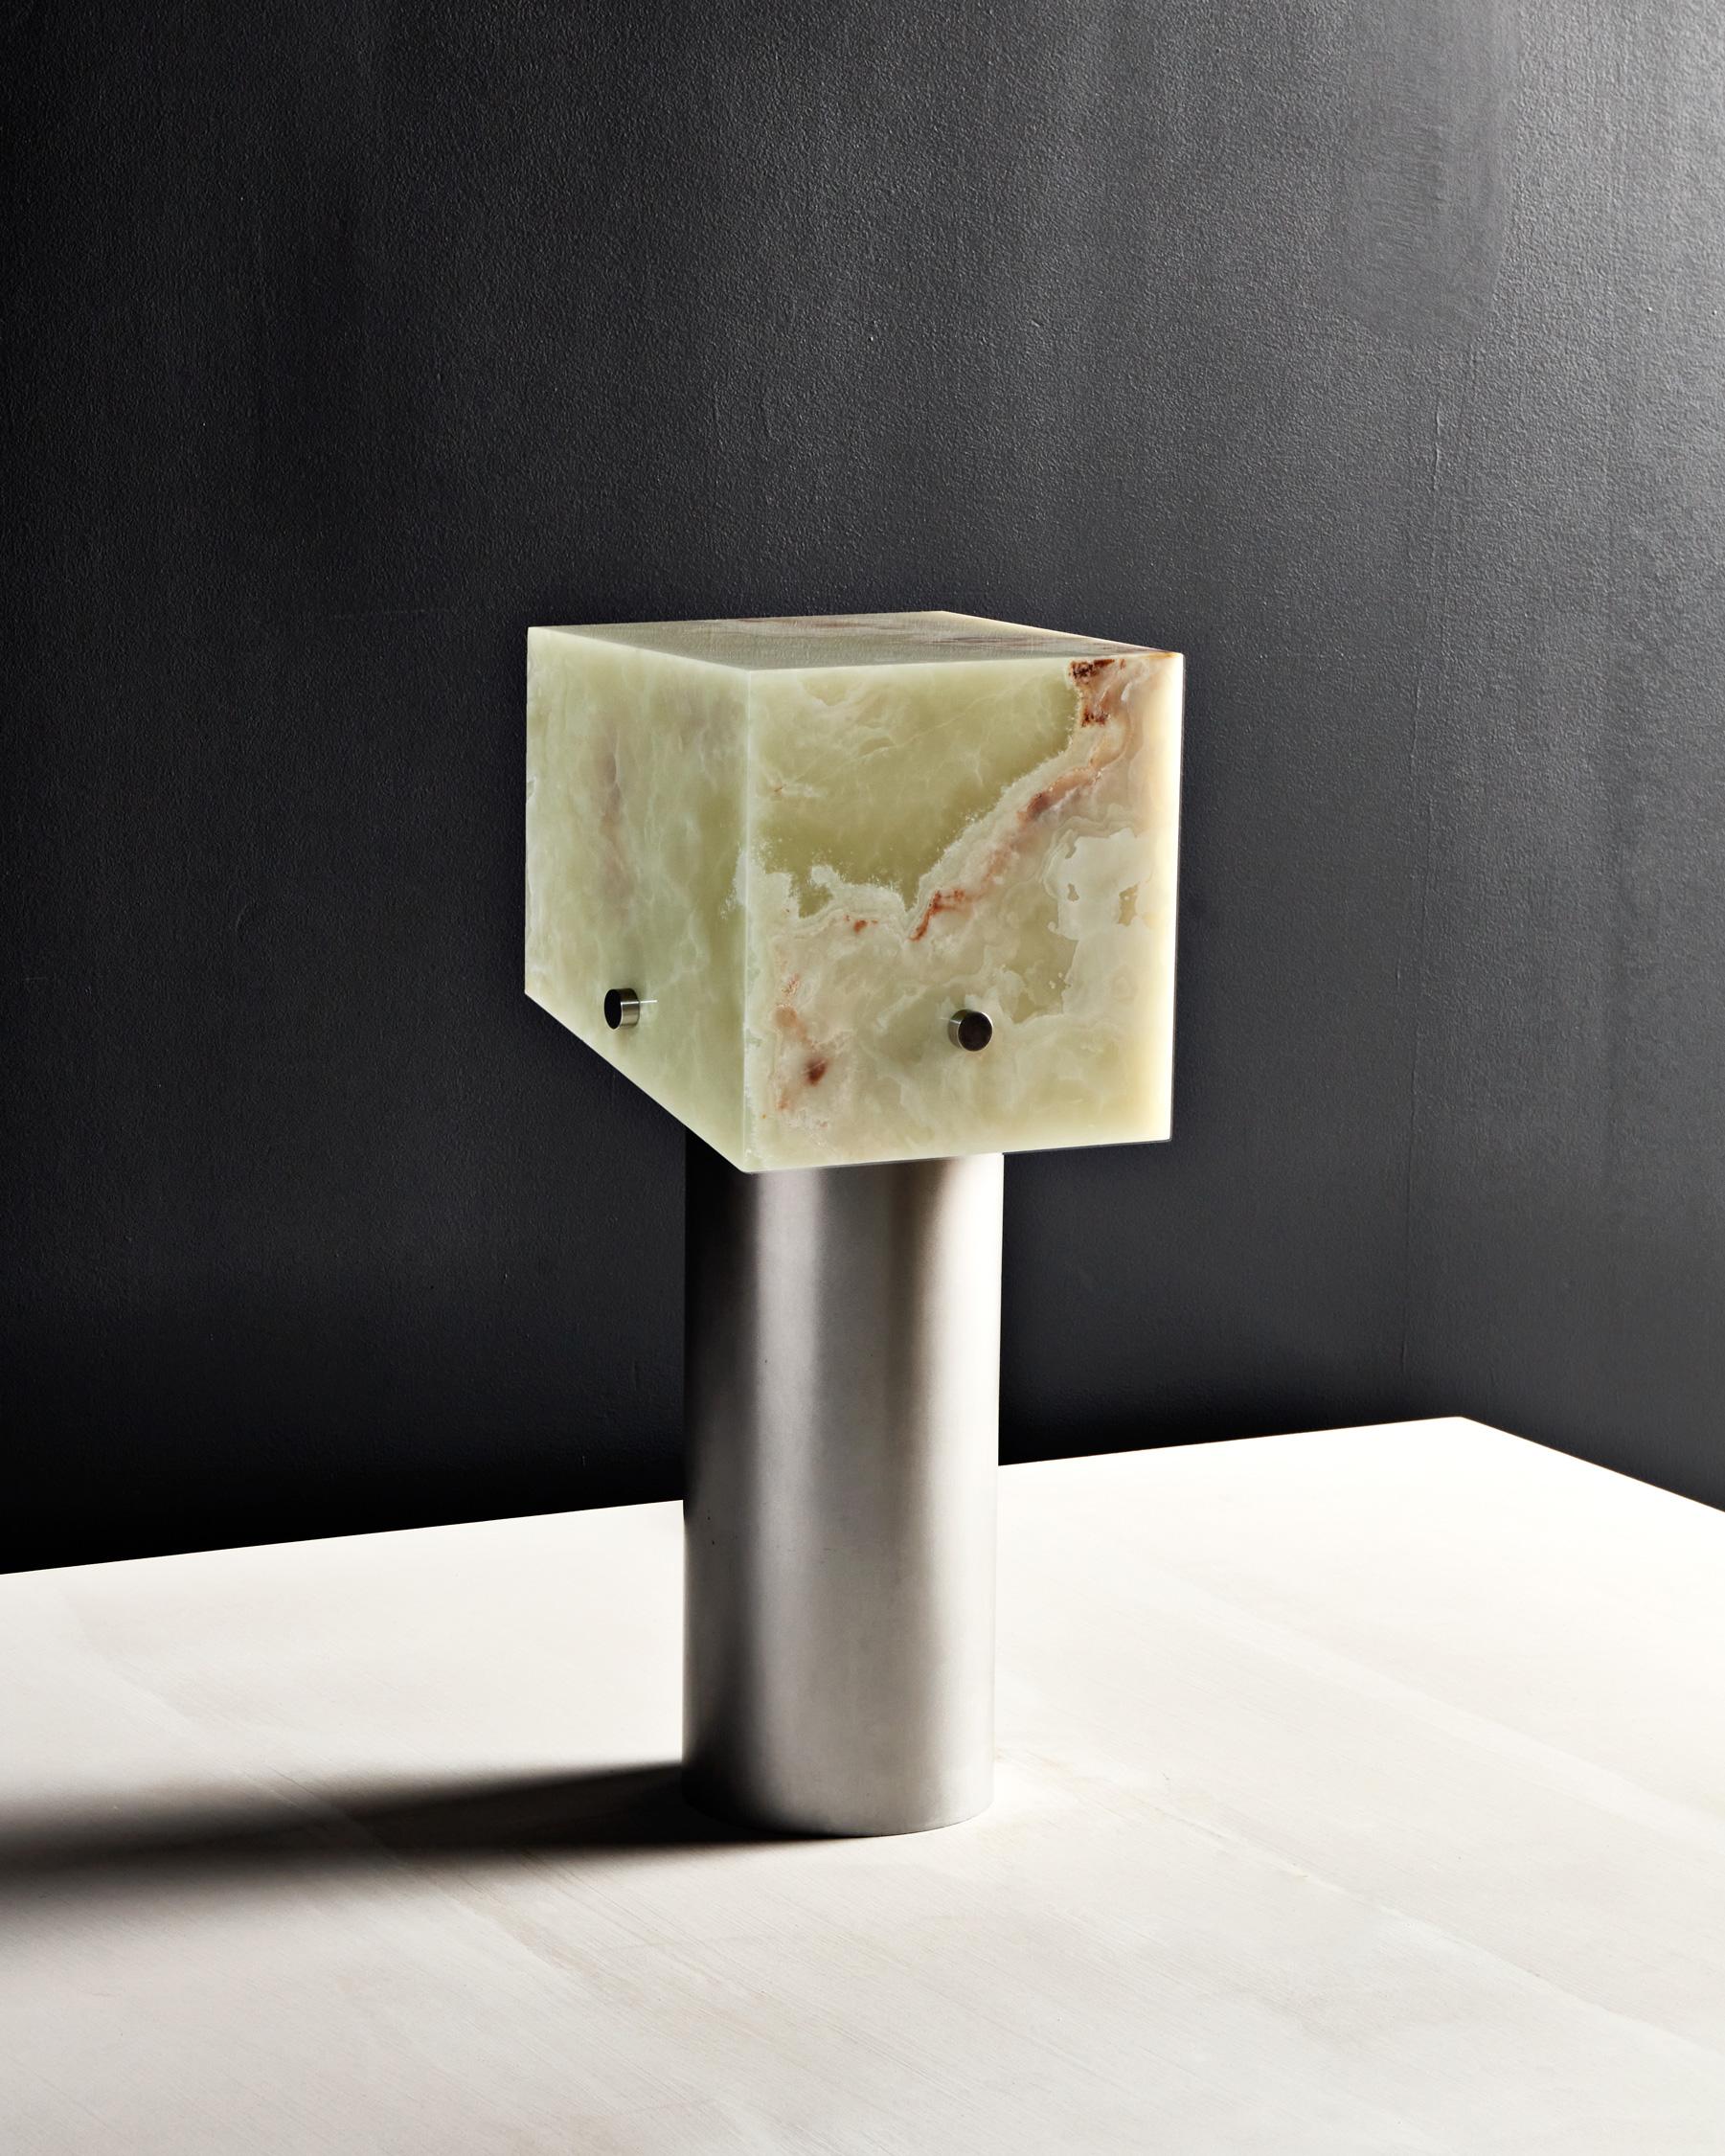 The sculptural design of the Mada Lamp plays with balance, translucency, and geometric form to create a harmonious, contemporary piece. The lamp is comprised of a marble or onyx lamp shade which hovers above a cylindrical aluminum or brass base. The